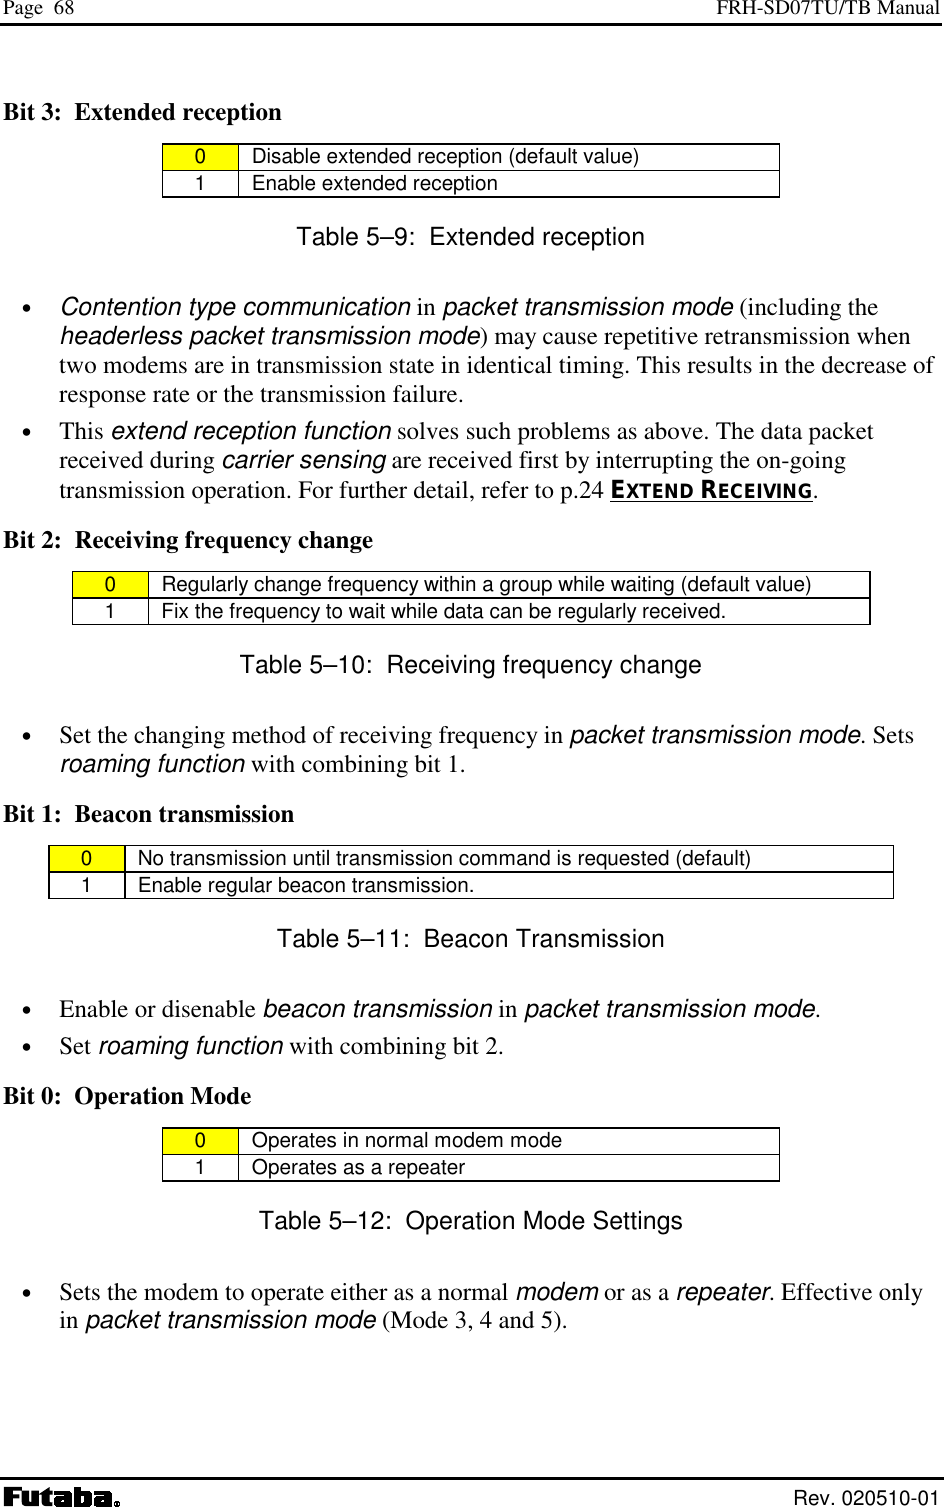 Page  68  FRH-SD07TU/TB Manual  Rev. 020510-01 Bit 3:  Extended reception 0   Disable extended reception (default value) 1   Enable extended reception  Table 5–9:  Extended reception •  Contention type communication in packet transmission mode (including the headerless packet transmission mode) may cause repetitive retransmission when two modems are in transmission state in identical timing. This results in the decrease of response rate or the transmission failure. •  This extend reception function solves such problems as above. The data packet received during carrier sensing are received first by interrupting the on-going transmission operation. For further detail, refer to p.24 EXTEND RECEIVING. Bit 2:  Receiving frequency change 0   Regularly change frequency within a group while waiting (default value) 1   Fix the frequency to wait while data can be regularly received. Table 5–10:  Receiving frequency change  •  Set the changing method of receiving frequency in packet transmission mode. Sets roaming function with combining bit 1. Bit 1:  Beacon transmission 0   No transmission until transmission command is requested (default) 1   Enable regular beacon transmission. Table 5–11:  Beacon Transmission •  Enable or disenable beacon transmission in packet transmission mode. •  Set roaming function with combining bit 2. Bit 0:  Operation Mode 0   Operates in normal modem mode 1   Operates as a repeater Table 5–12:  Operation Mode Settings  •  Sets the modem to operate either as a normal modem or as a repeater. Effective only in packet transmission mode (Mode 3, 4 and 5). 